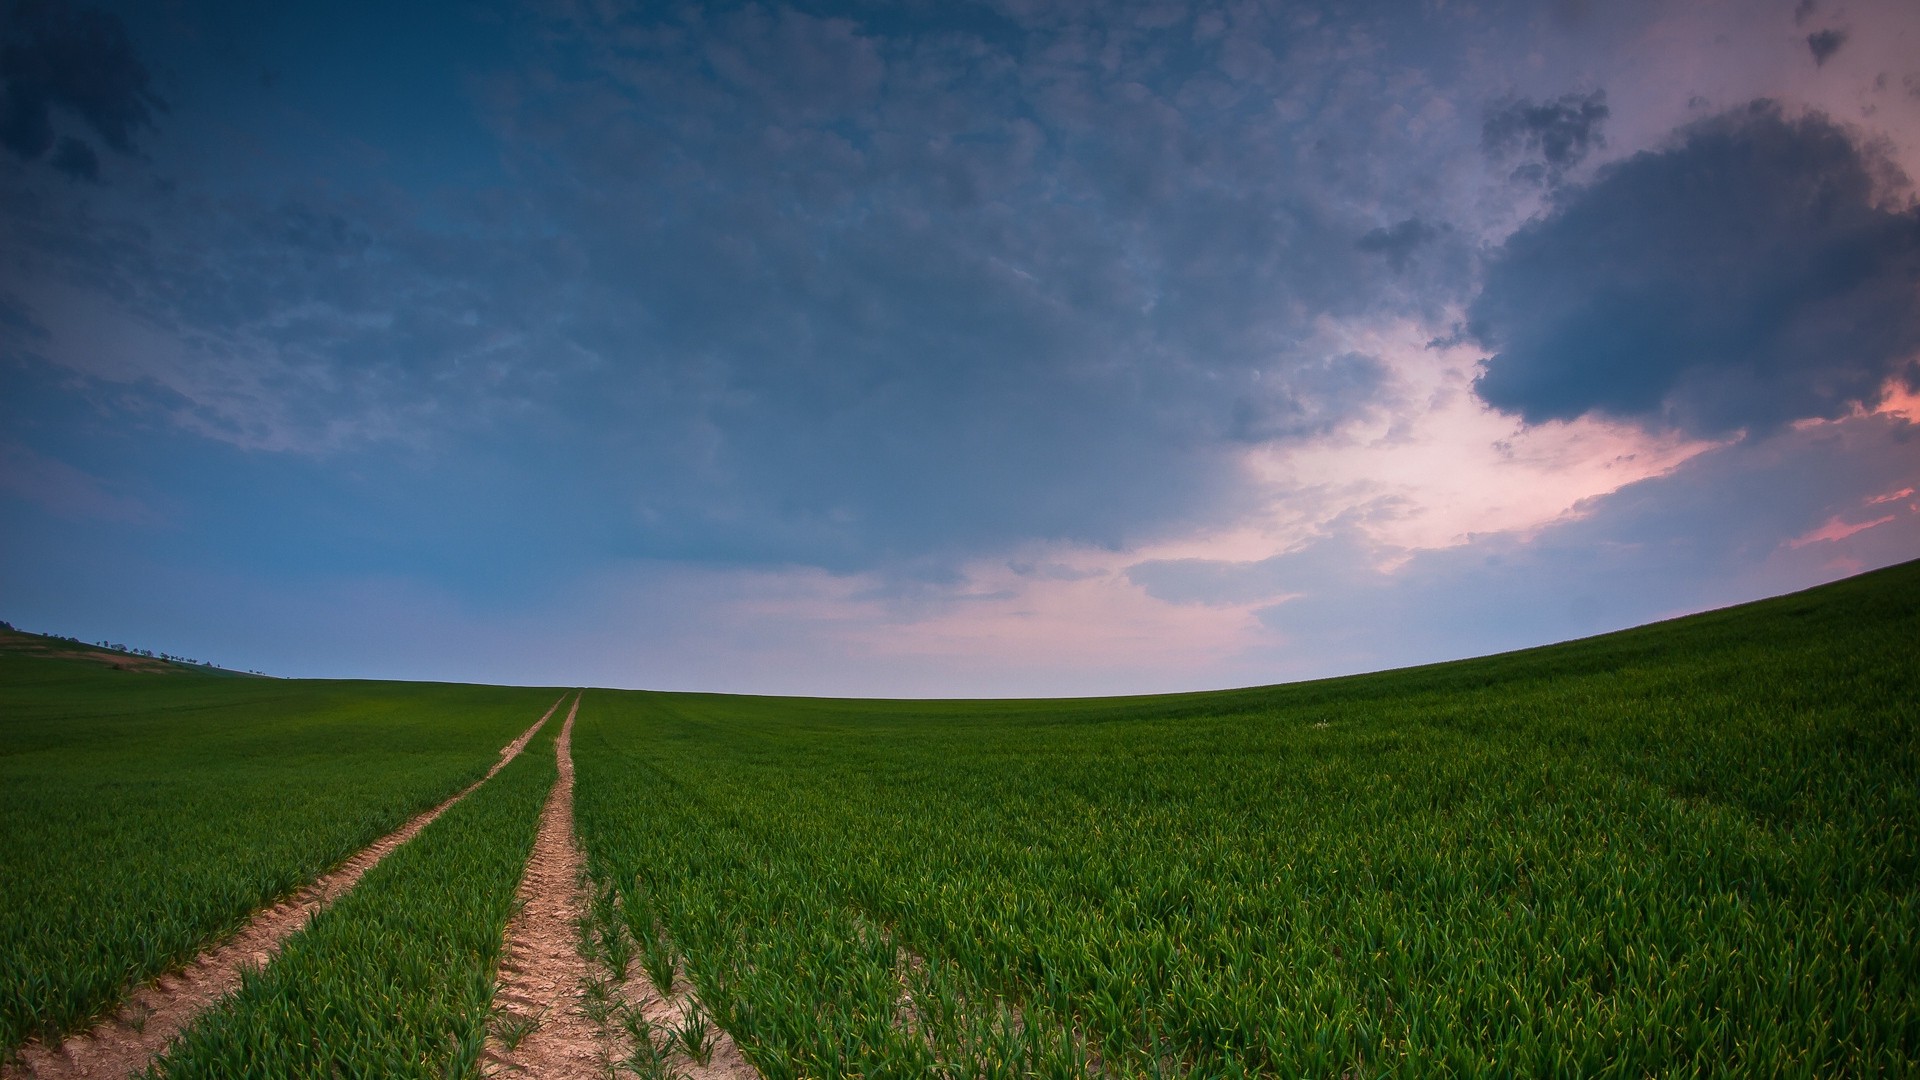 1920x1080 wallpapers: field, road, country, crops, green (image)